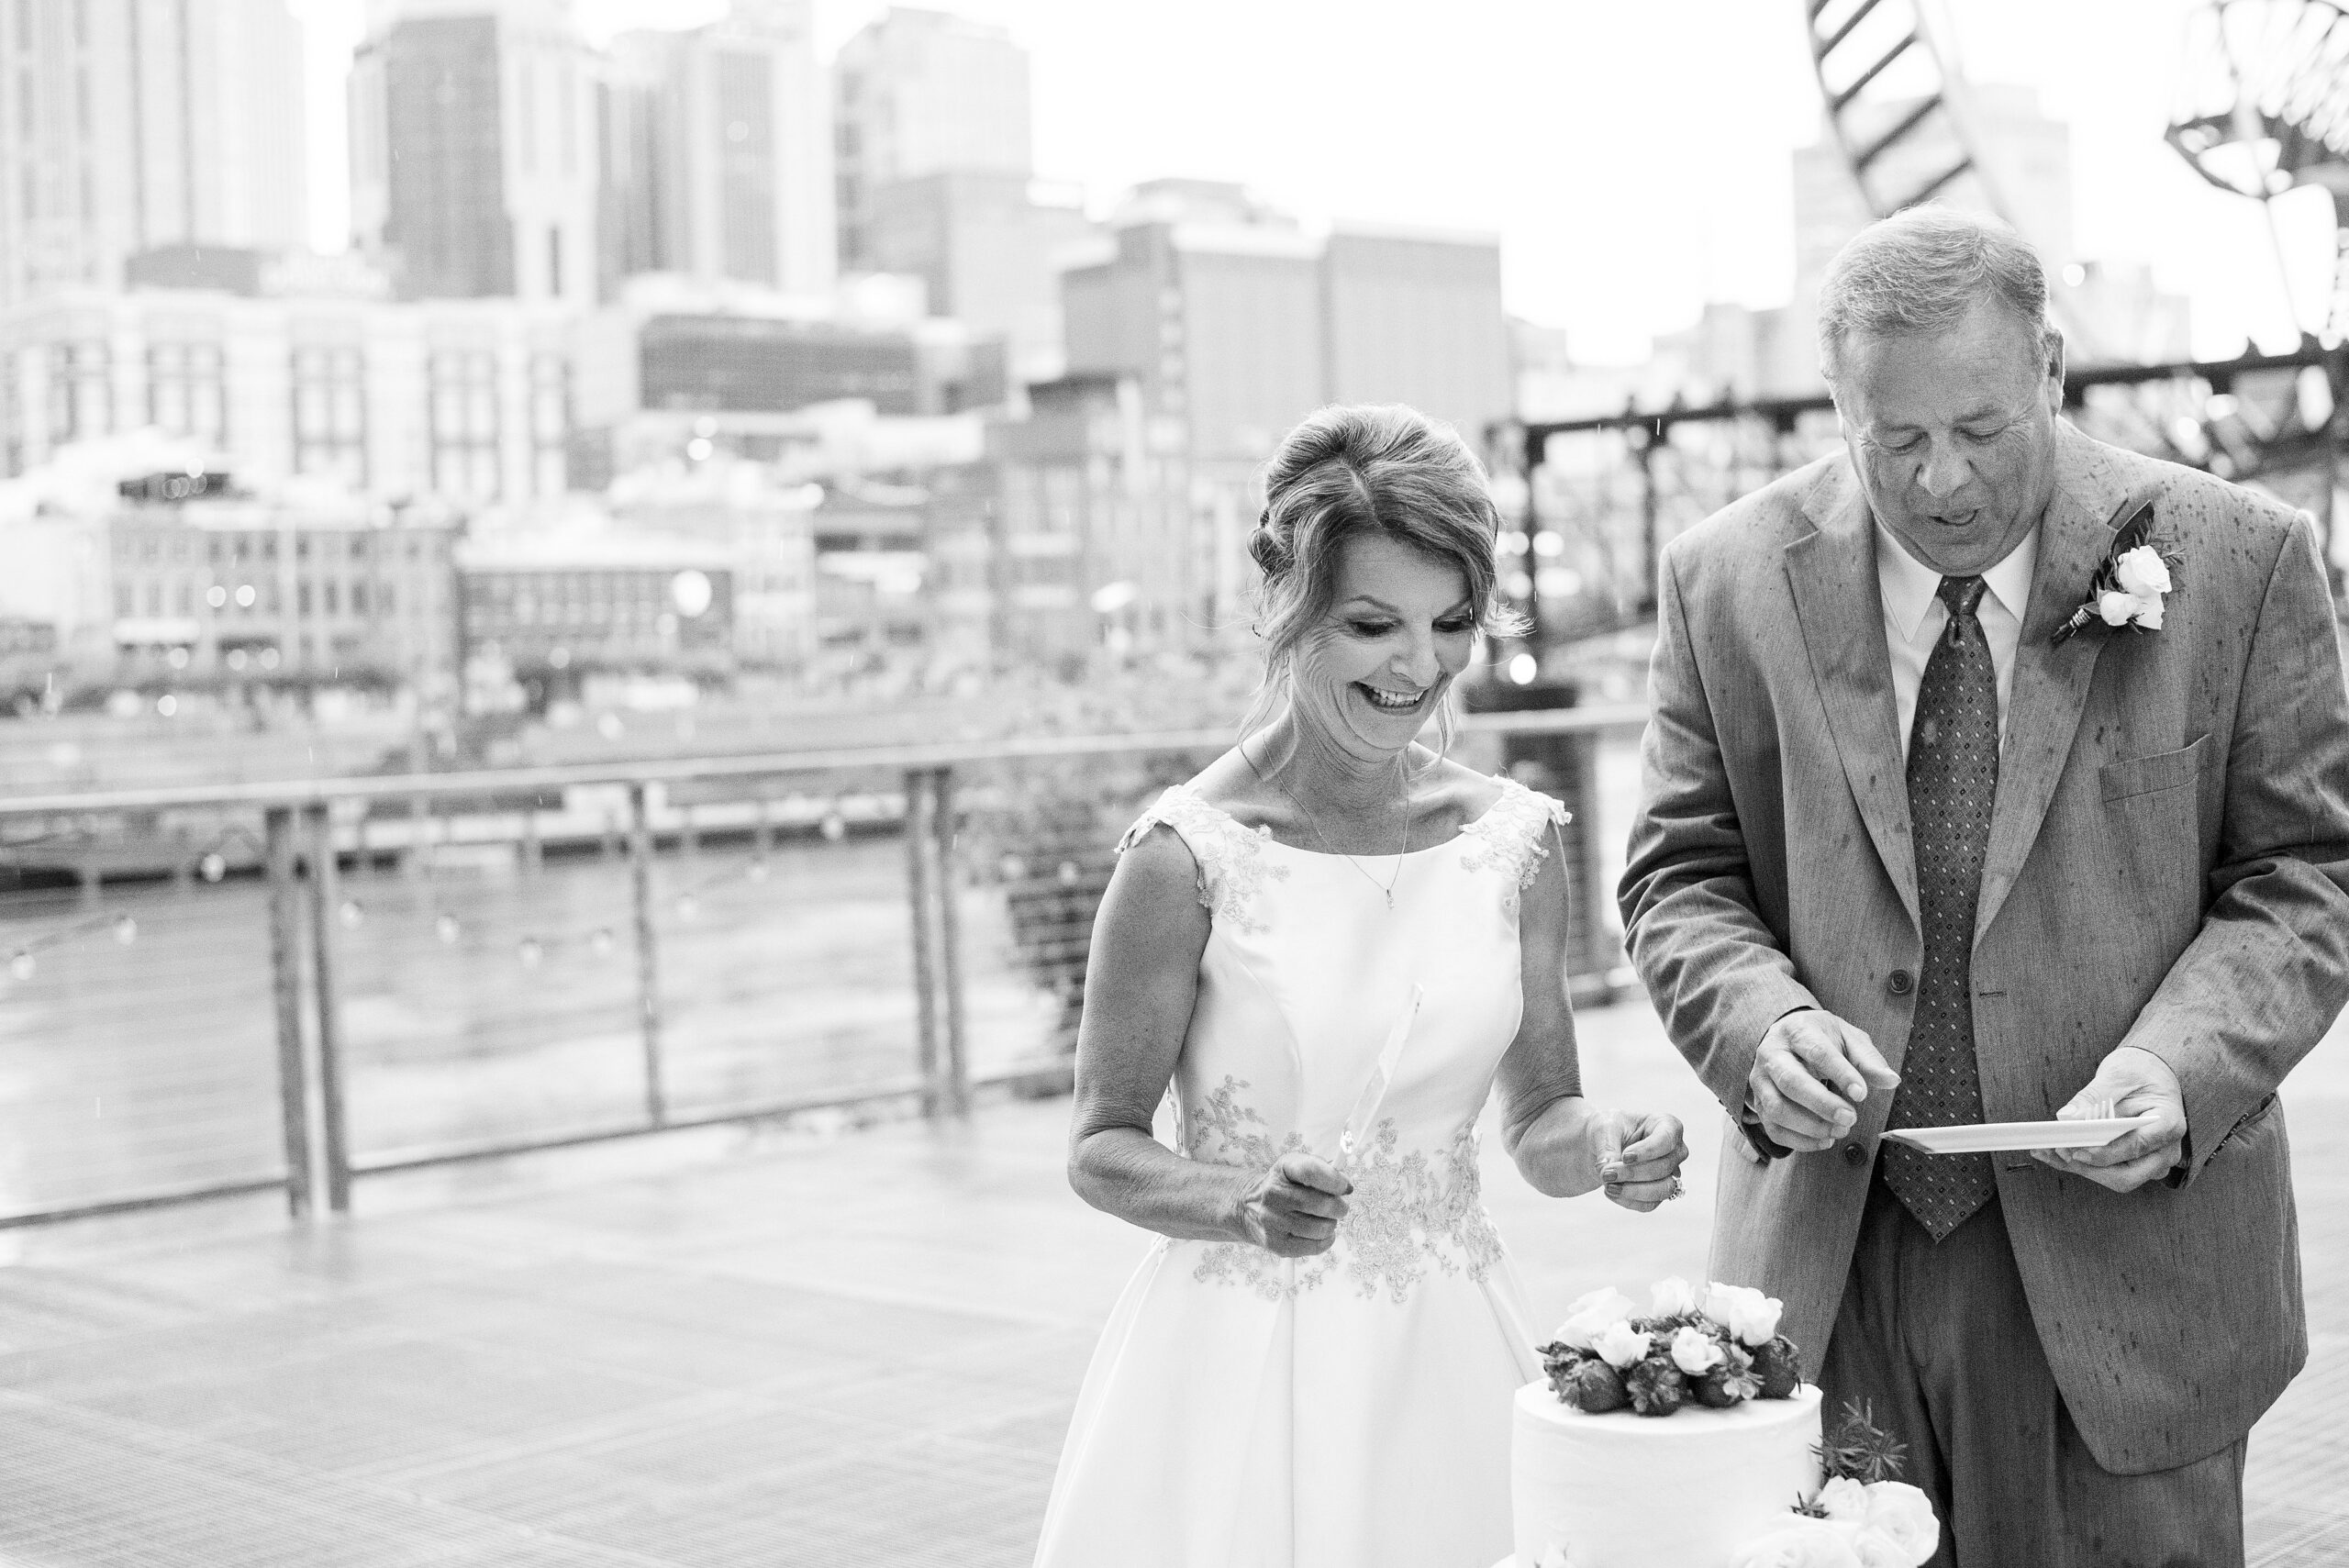 A black and white photo of the bride smiling down at the cake while holding a cake knife. The groom holds out a white square plate for her to put the cake on. The cake is a small one tier cake with strawberries and white flowers. The bride is wearing a tea white sleeveless wedding dress with lace detailing around the waist. The groom is wearing a suit with a white shirt and tie. The groom has a white boutonniere. The Cumberland River and Nashville skyline are in the background behind them.